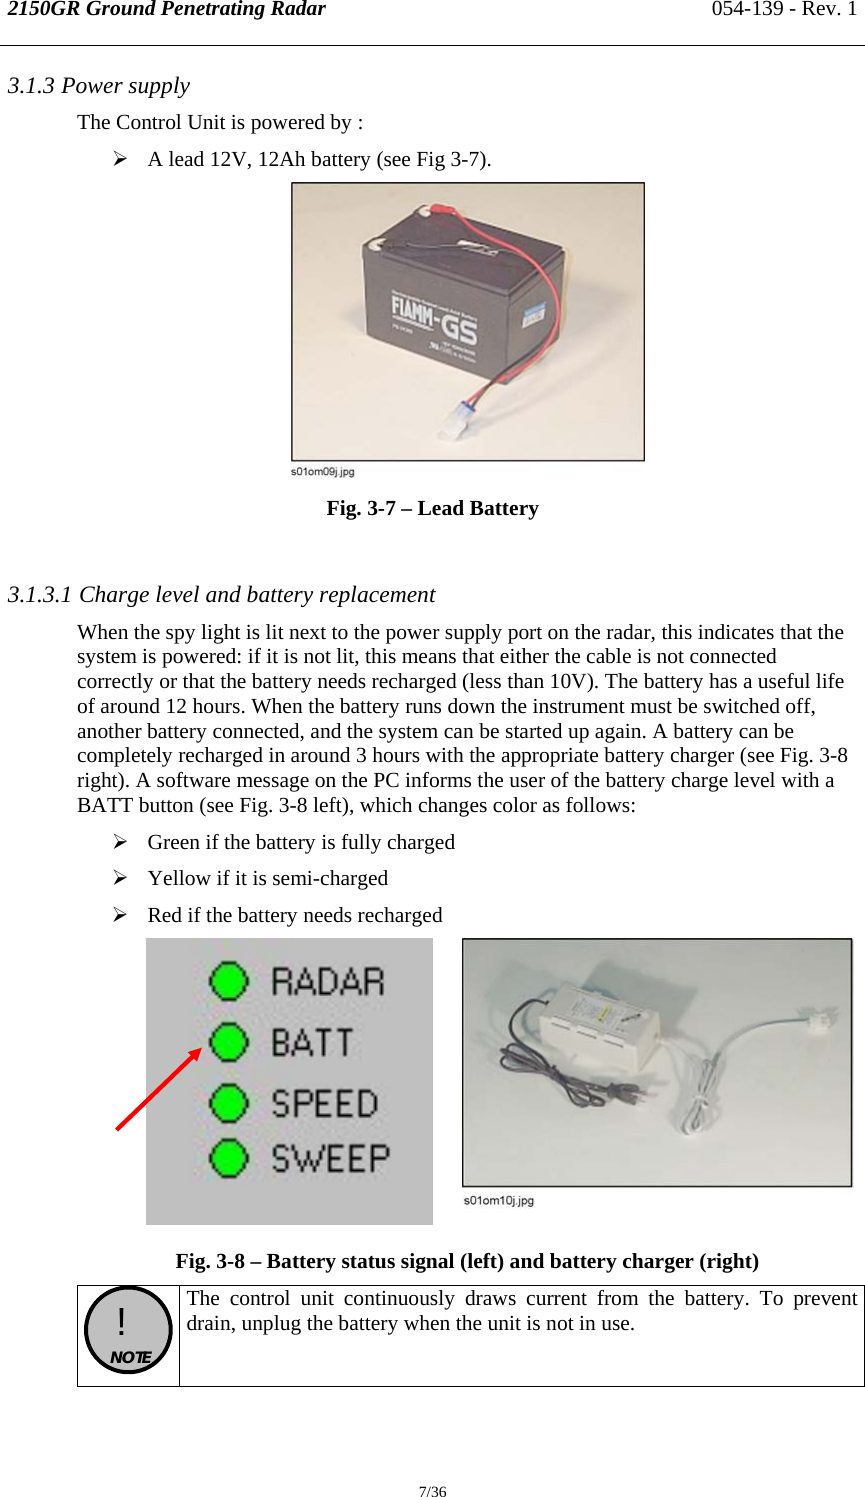 2150GR Ground Penetrating Radar 054-139 - Rev. 1  7/36 3.1.3 Power supply The Control Unit is powered by : ¾ A lead 12V, 12Ah battery (see Fig 3-7).  Fig. 3-7 – Lead Battery  3.1.3.1 Charge level and battery replacement When the spy light is lit next to the power supply port on the radar, this indicates that the system is powered: if it is not lit, this means that either the cable is not connected correctly or that the battery needs recharged (less than 10V). The battery has a useful life of around 12 hours. When the battery runs down the instrument must be switched off, another battery connected, and the system can be started up again. A battery can be completely recharged in around 3 hours with the appropriate battery charger (see Fig. 3-8 right). A software message on the PC informs the user of the battery charge level with a BATT button (see Fig. 3-8 left), which changes color as follows: ¾ Green if the battery is fully charged ¾ Yellow if it is semi-charged ¾ Red if the battery needs recharged     Fig. 3-8 – Battery status signal (left) and battery charger (right)  !  NOTE  The control unit continuously draws current from the battery. To prevent drain, unplug the battery when the unit is not in use. 